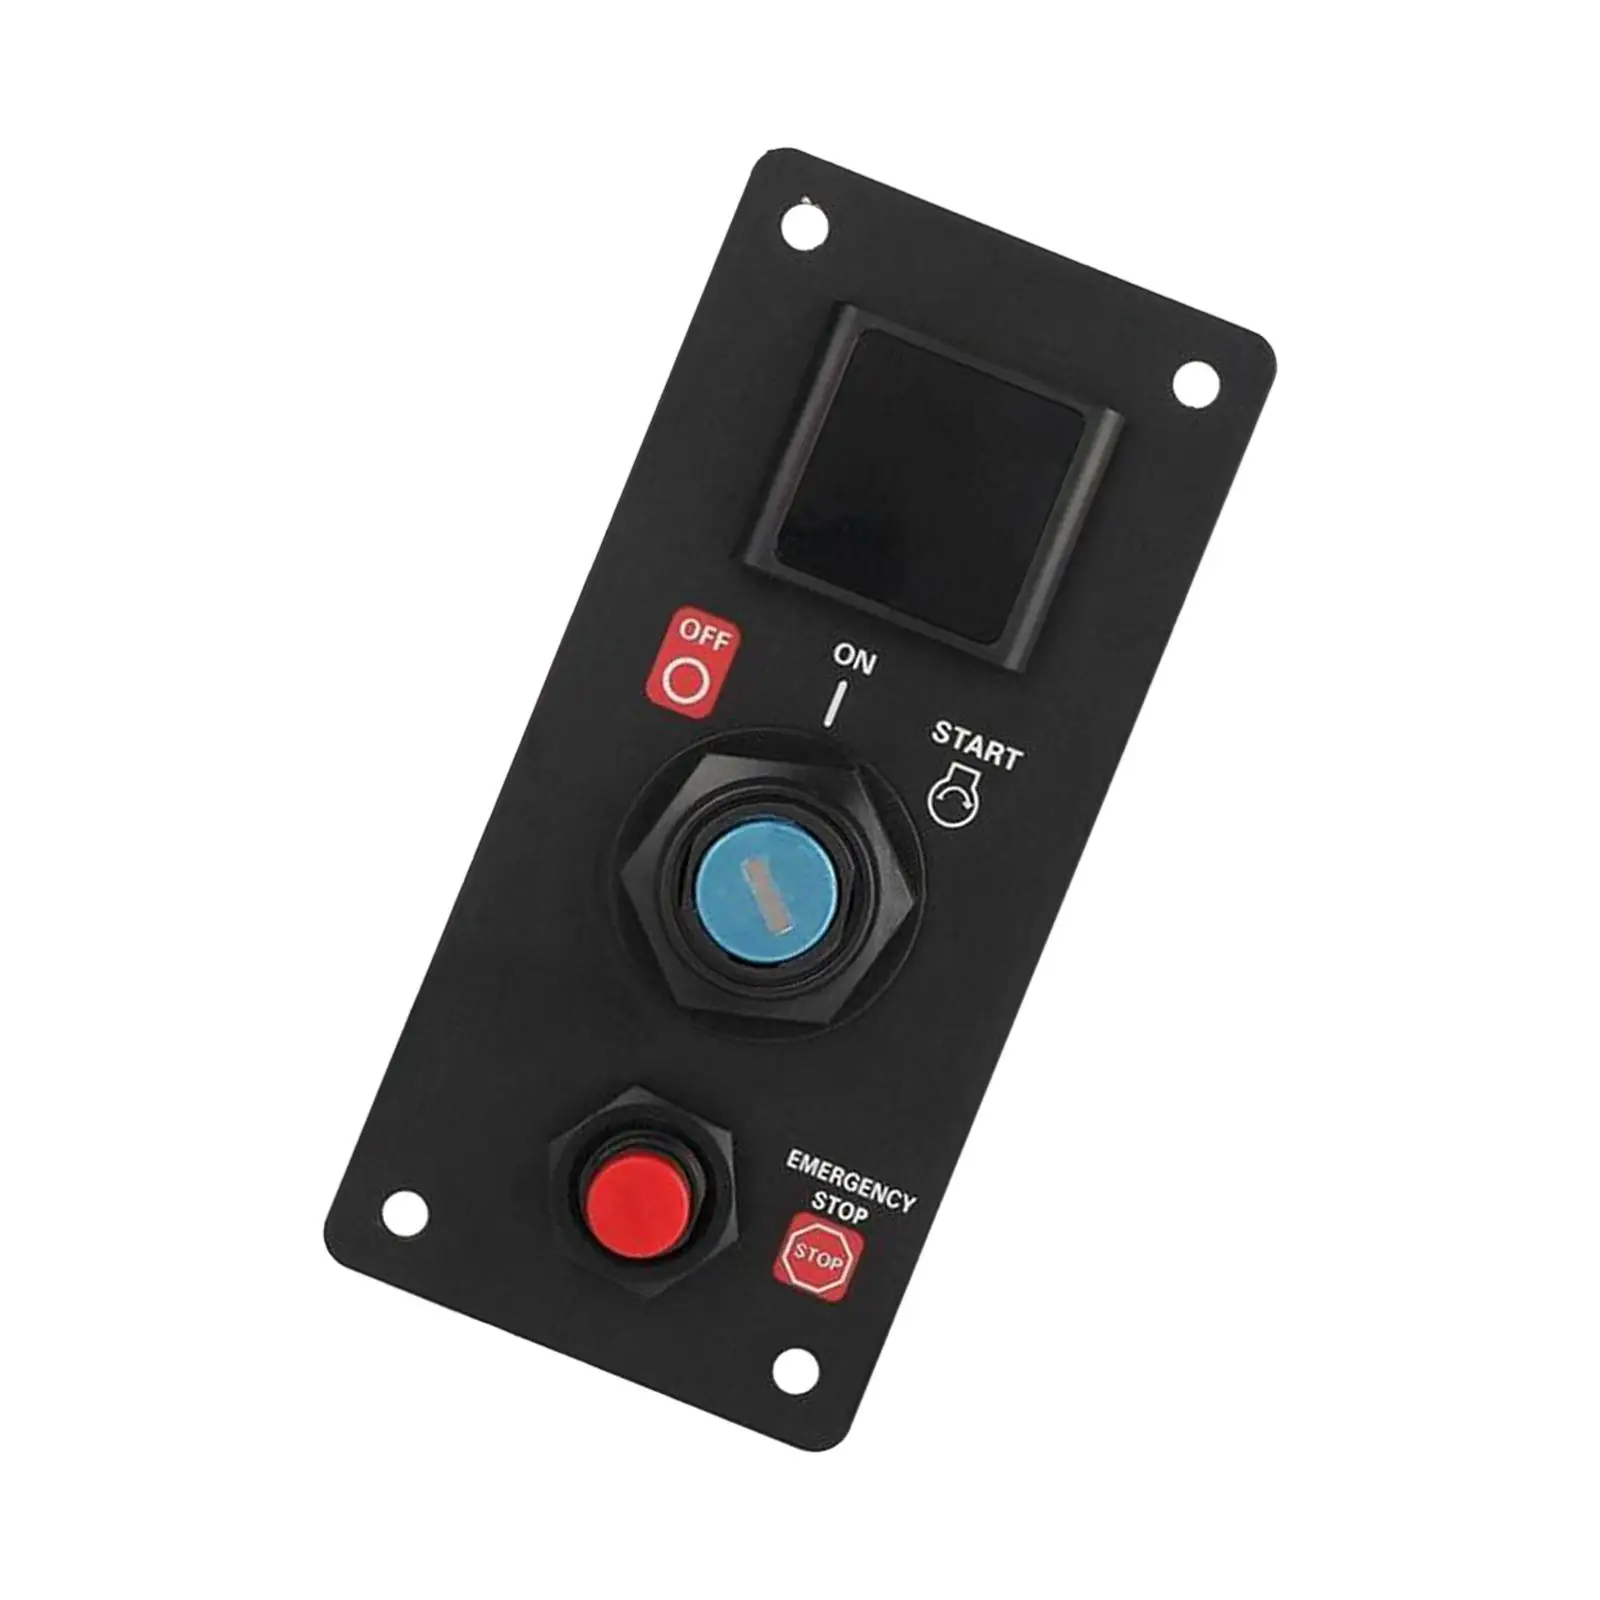 Ignition Switch Panel 06323-zz5-764 Replace Parts with Keys and Wire for Honda Outboard Accessory High Quality Durable